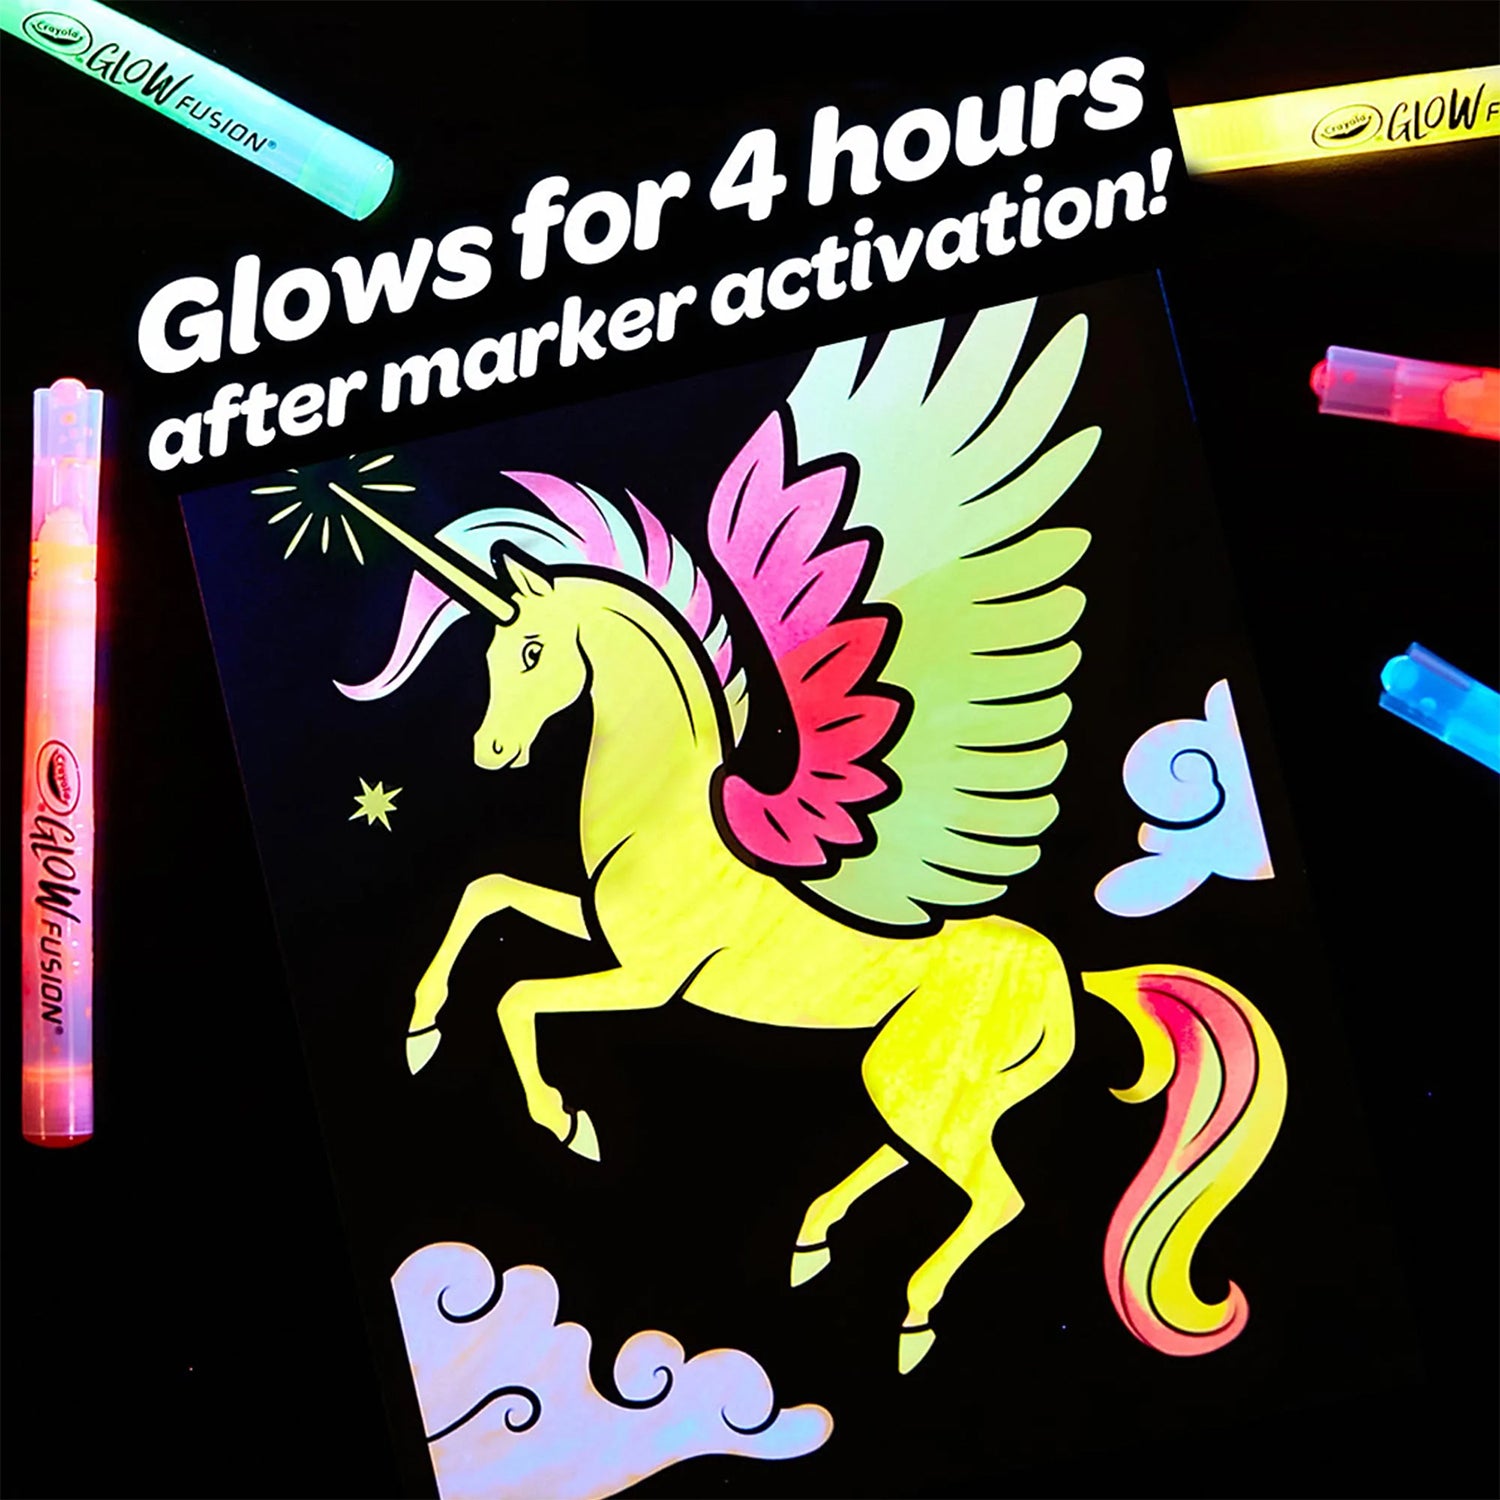 Crayola Glow Fusion Marker Coloring Set - Mythical Creatures